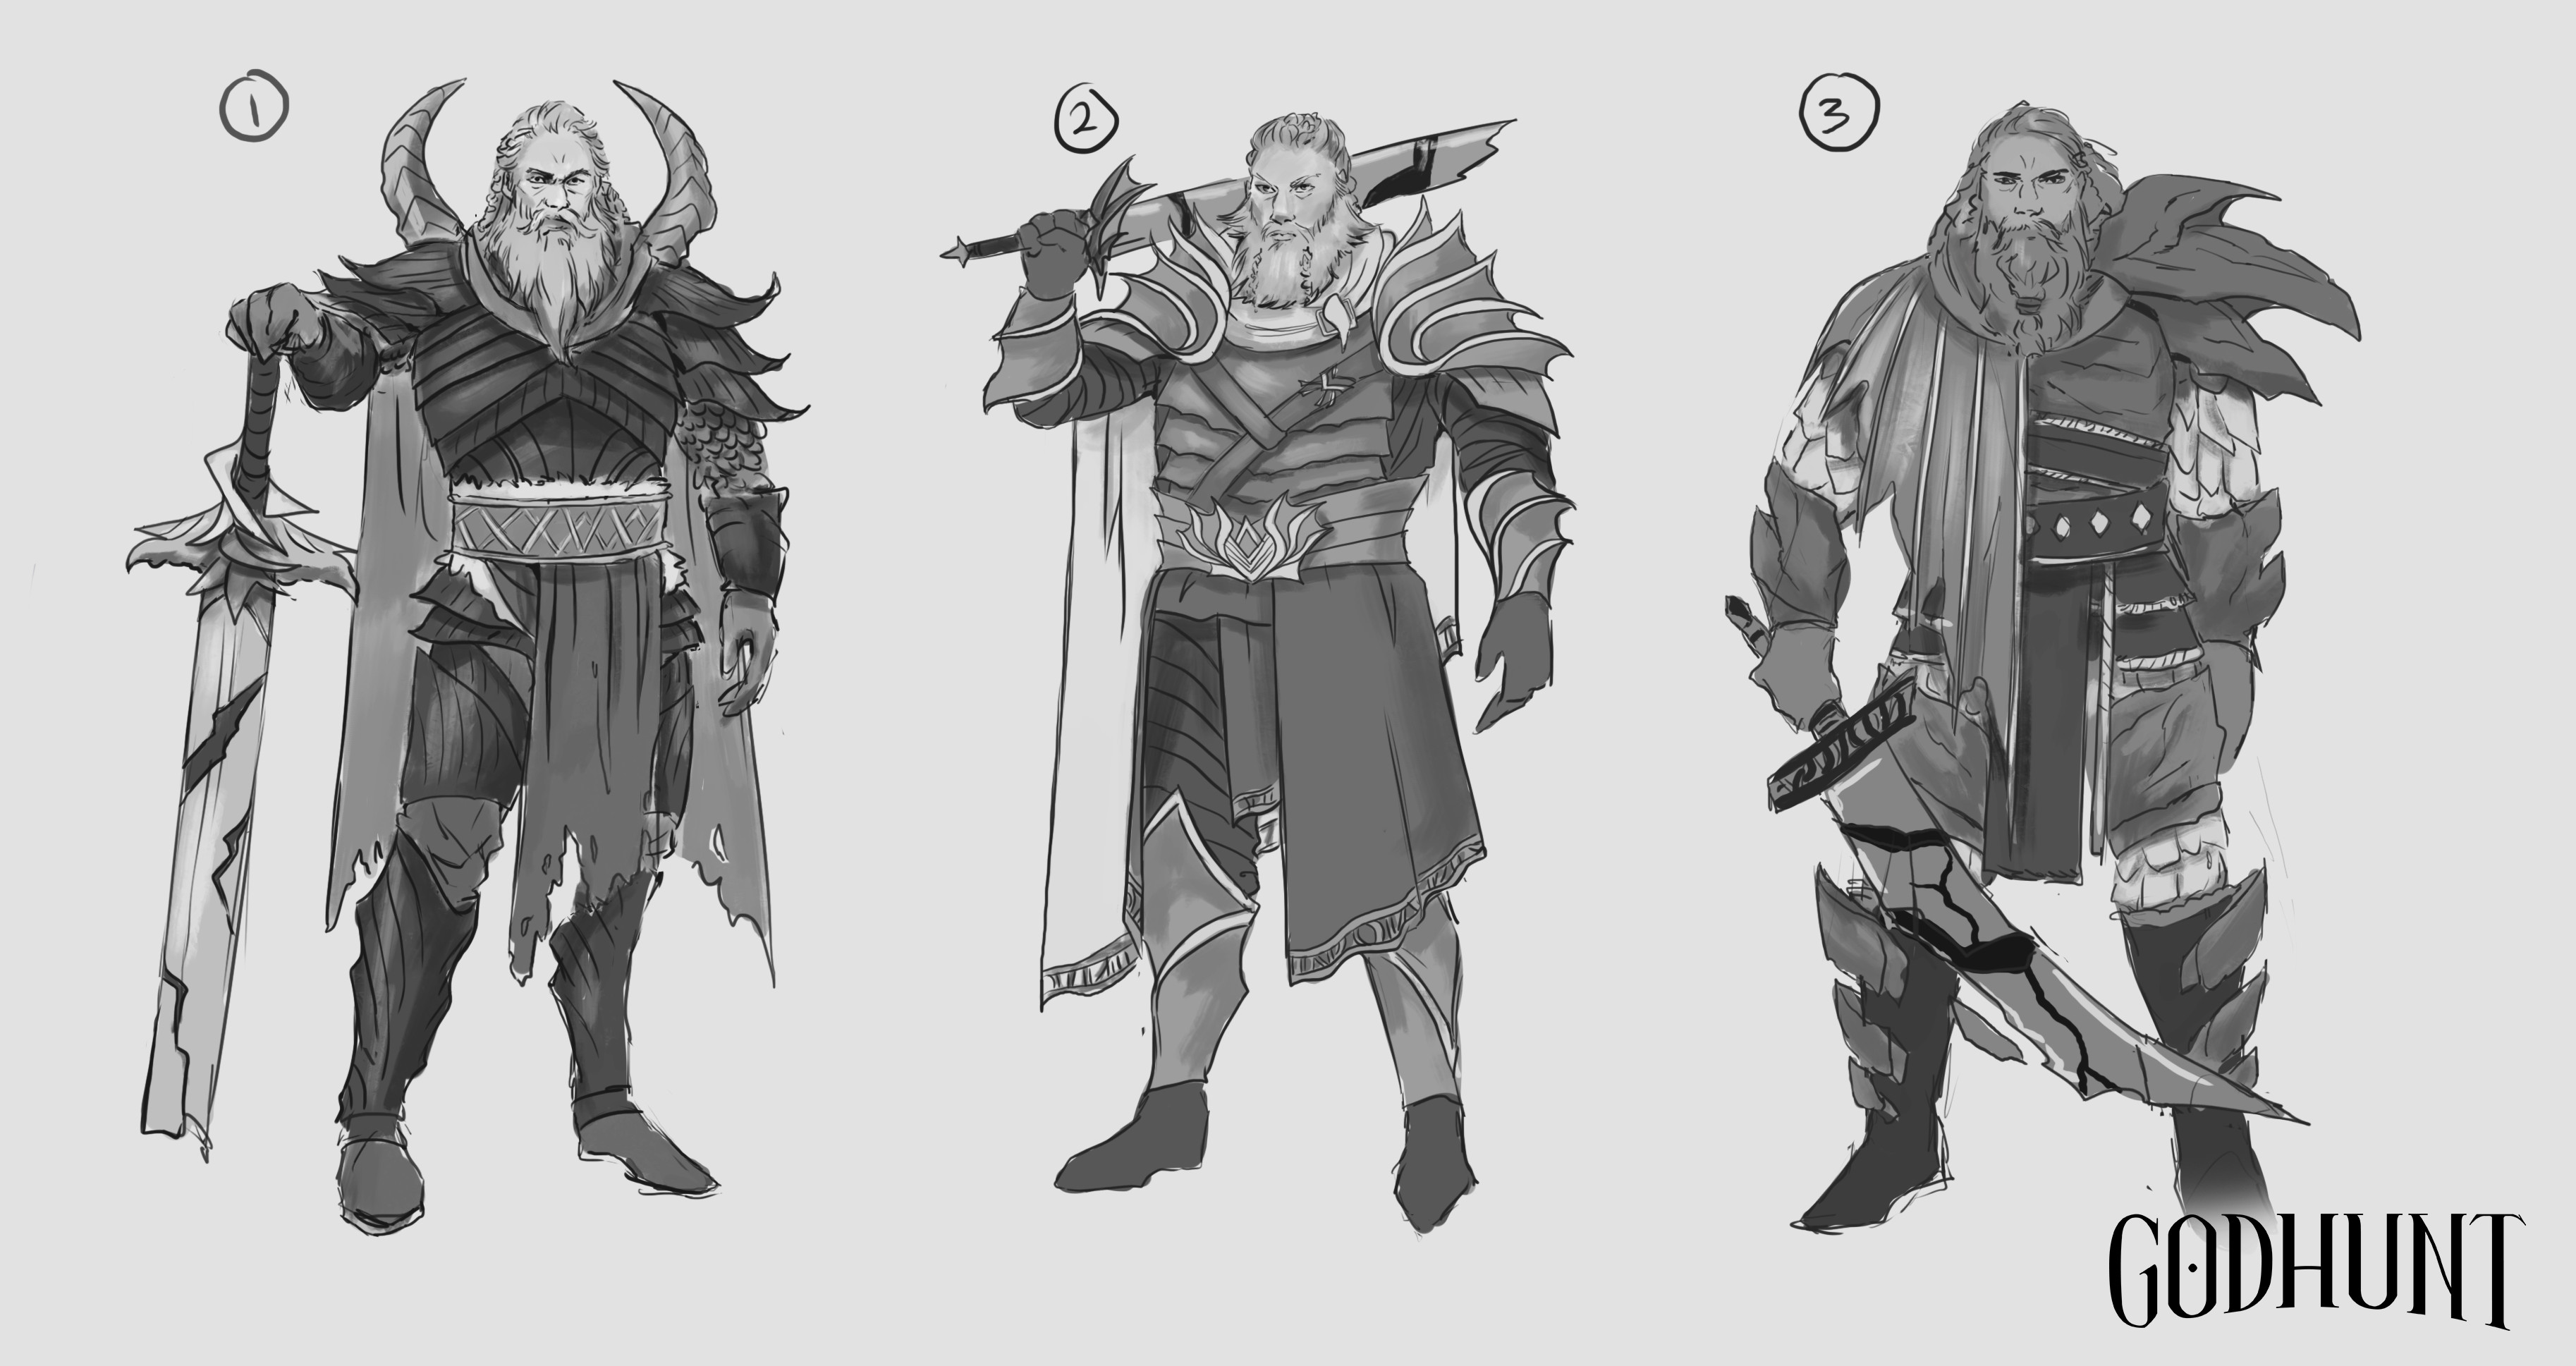 Initial concept ideas. Option 1 was chosen to continue ahead with. 